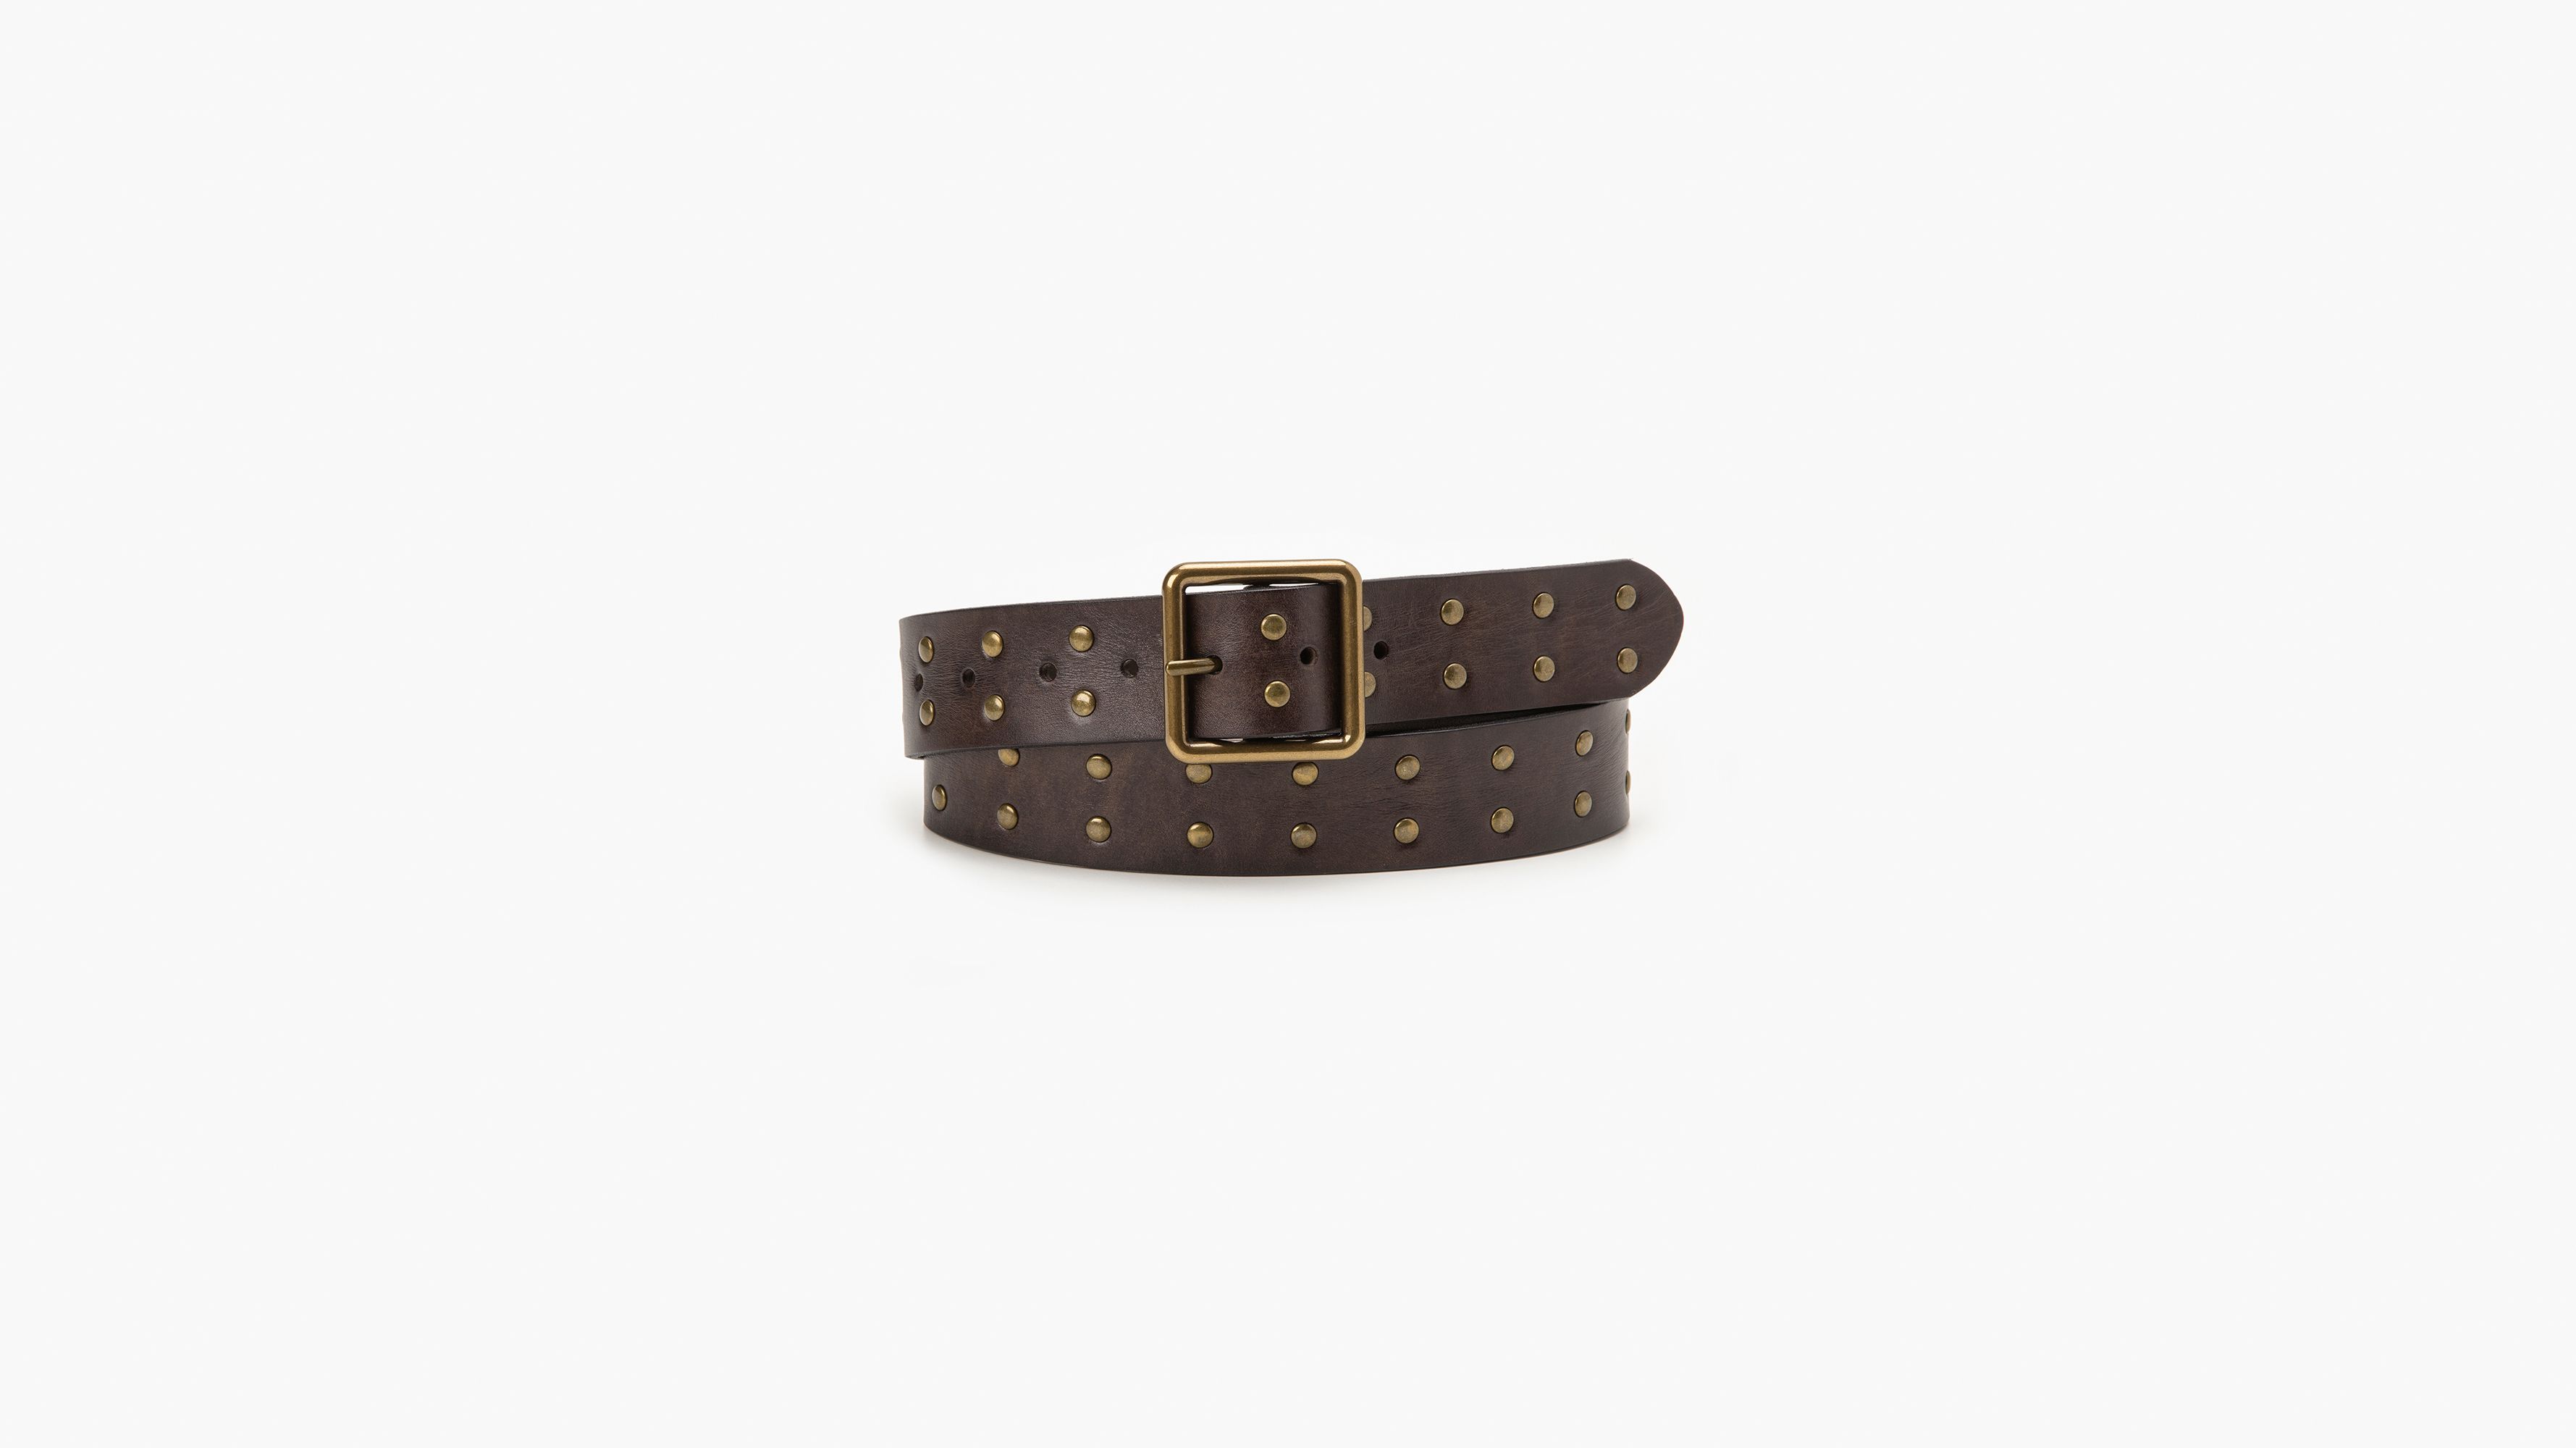 Authentic Lv belt without buckle